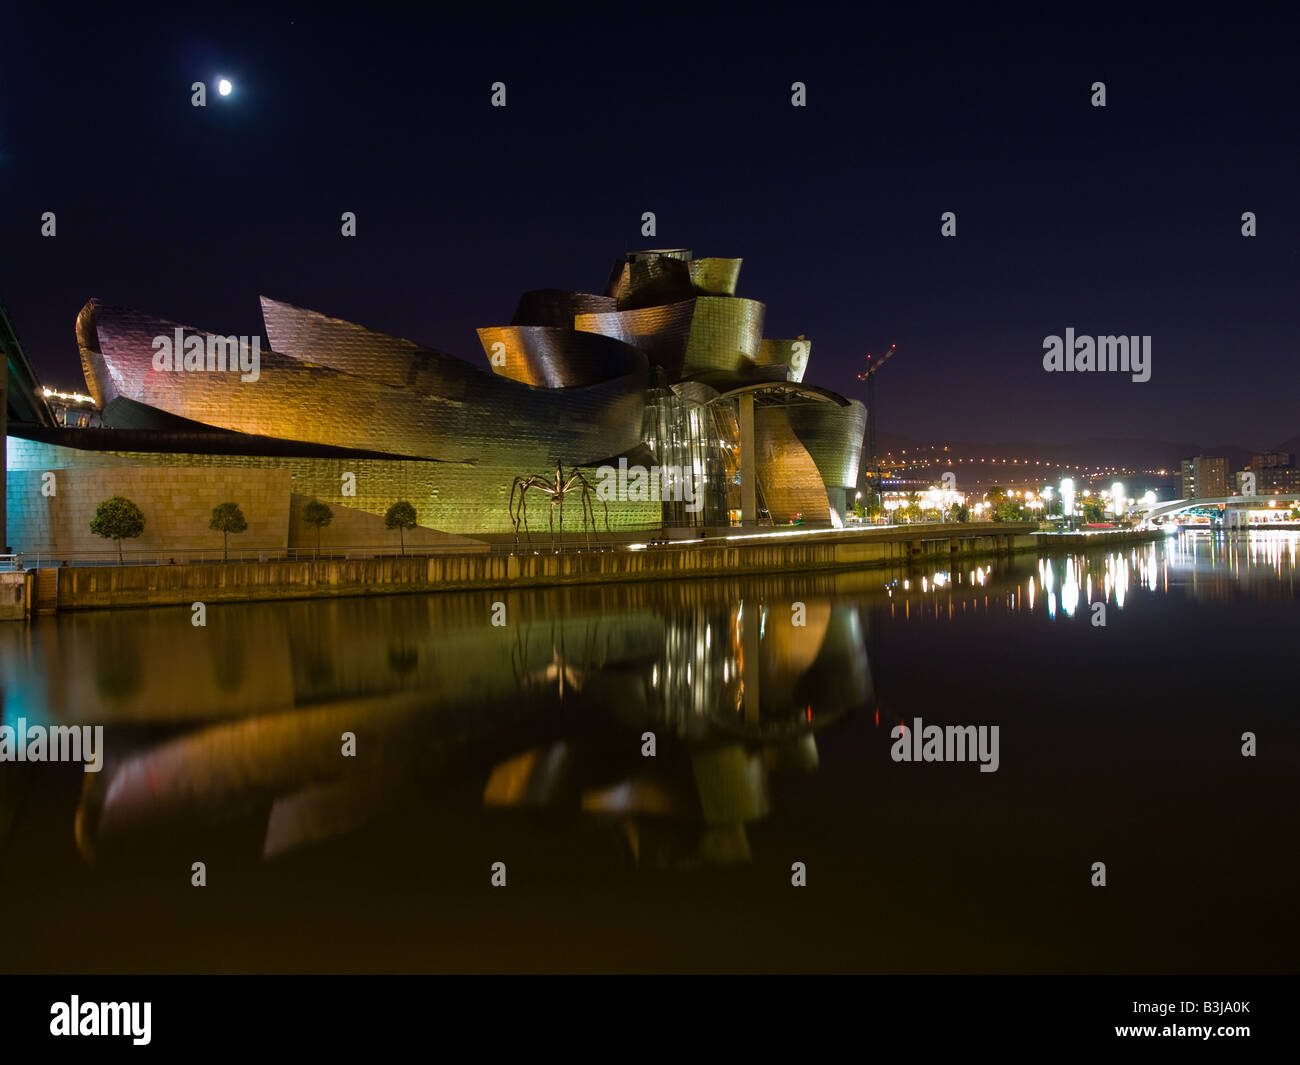 The magnificent Guggenheim Museum Bilbao, by Canadian architect Frank O. Gehry, glows at night. Stock Photo